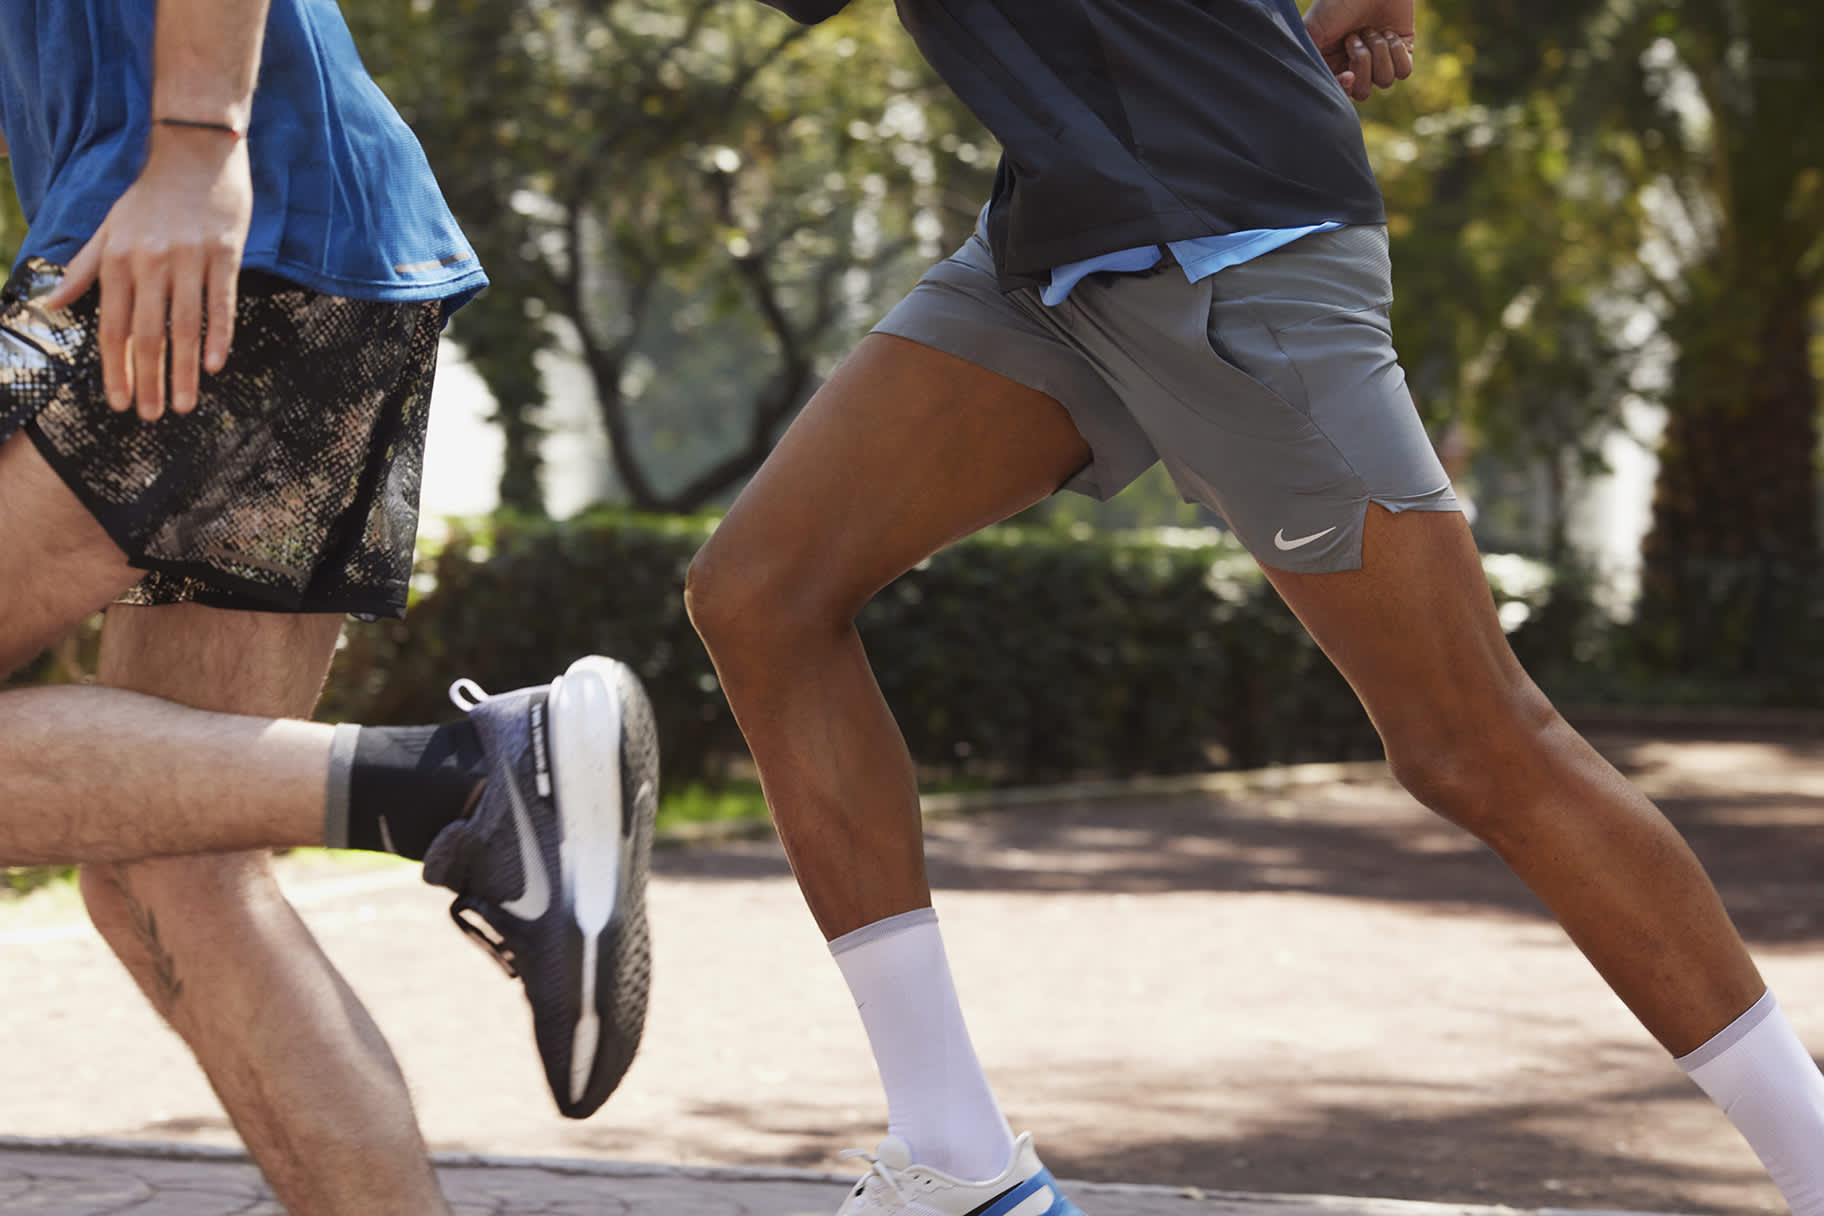 https://static.nike.com/a/images/w_1920,c_limit/975acece-6f60-4c58-892f-11b552aff8d6/the-best-running-shorts-for-men-by-nike.jpg